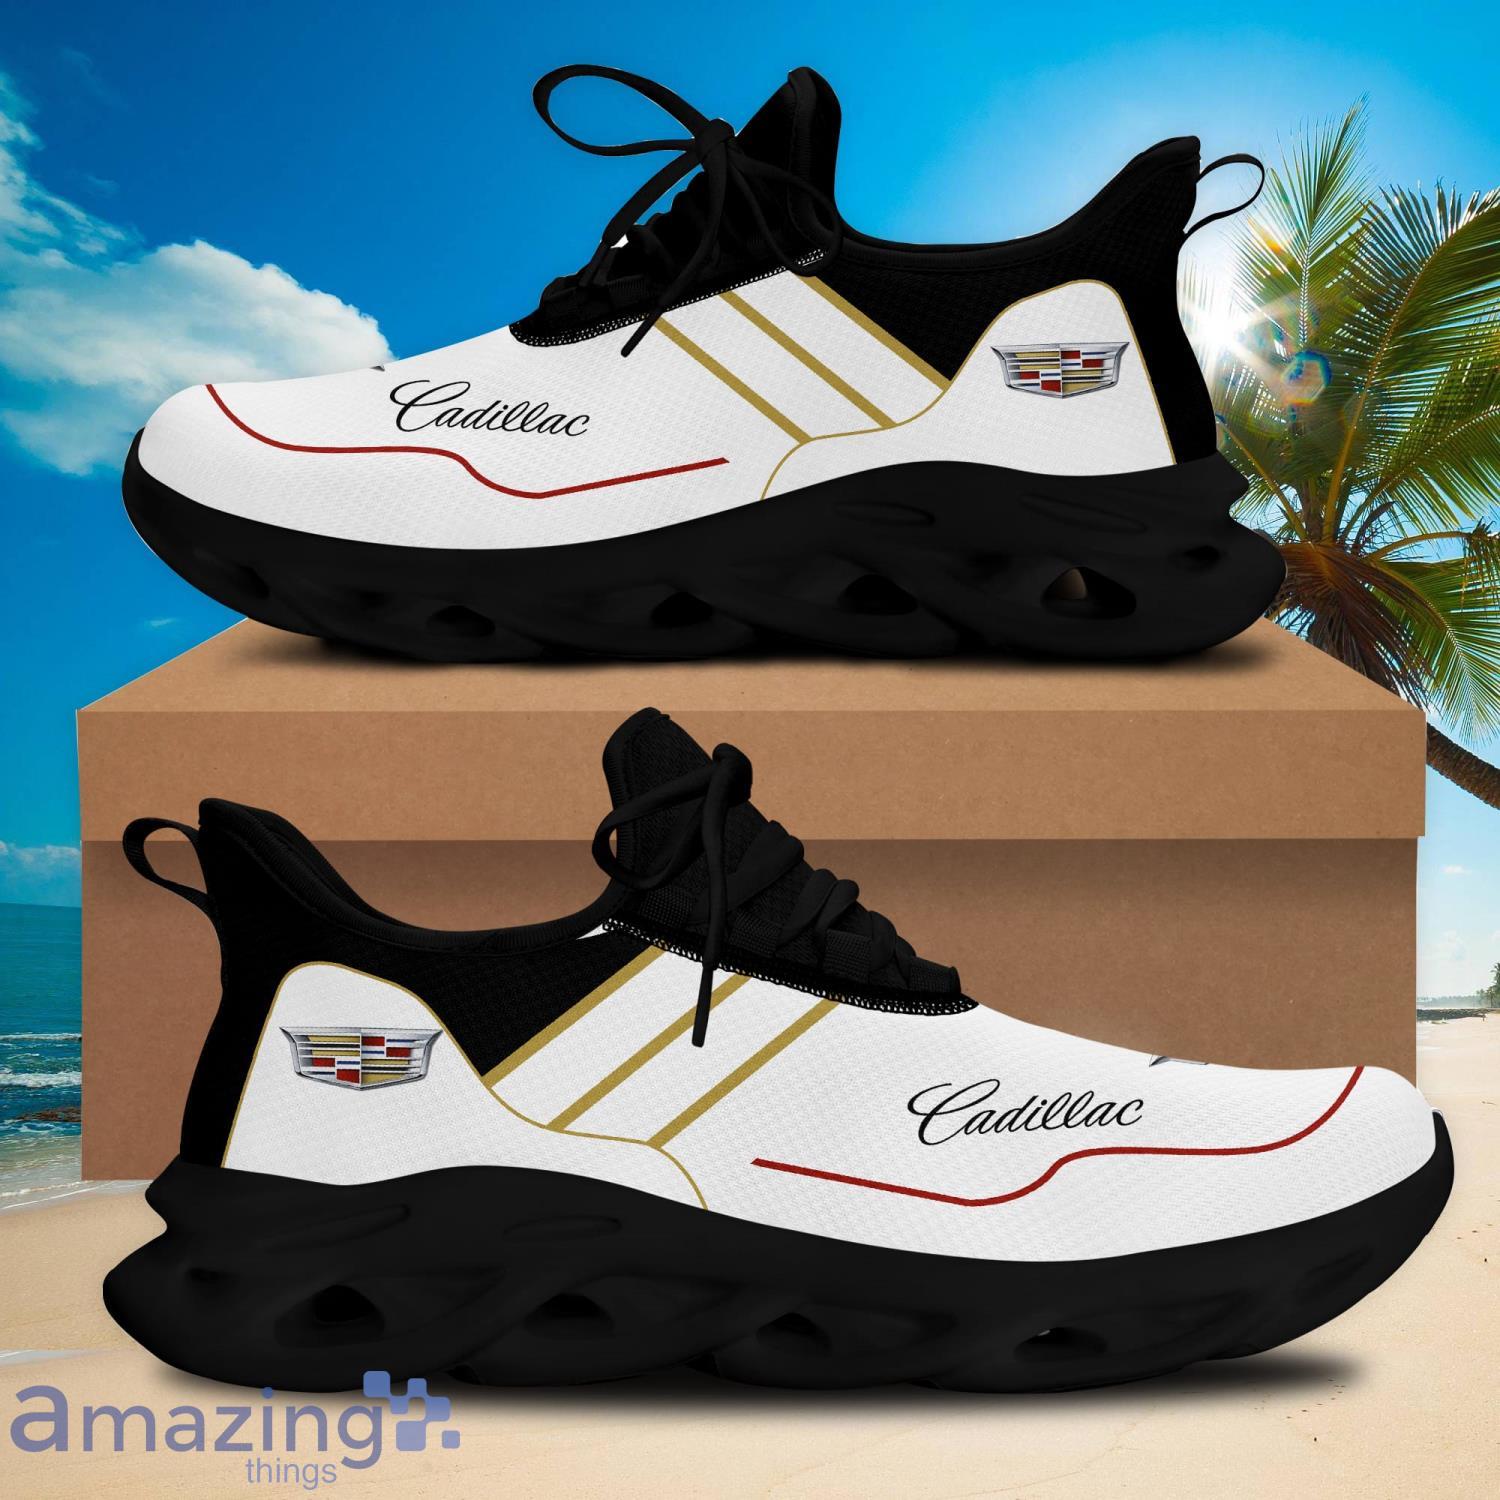 Cadillac Shoes for Men